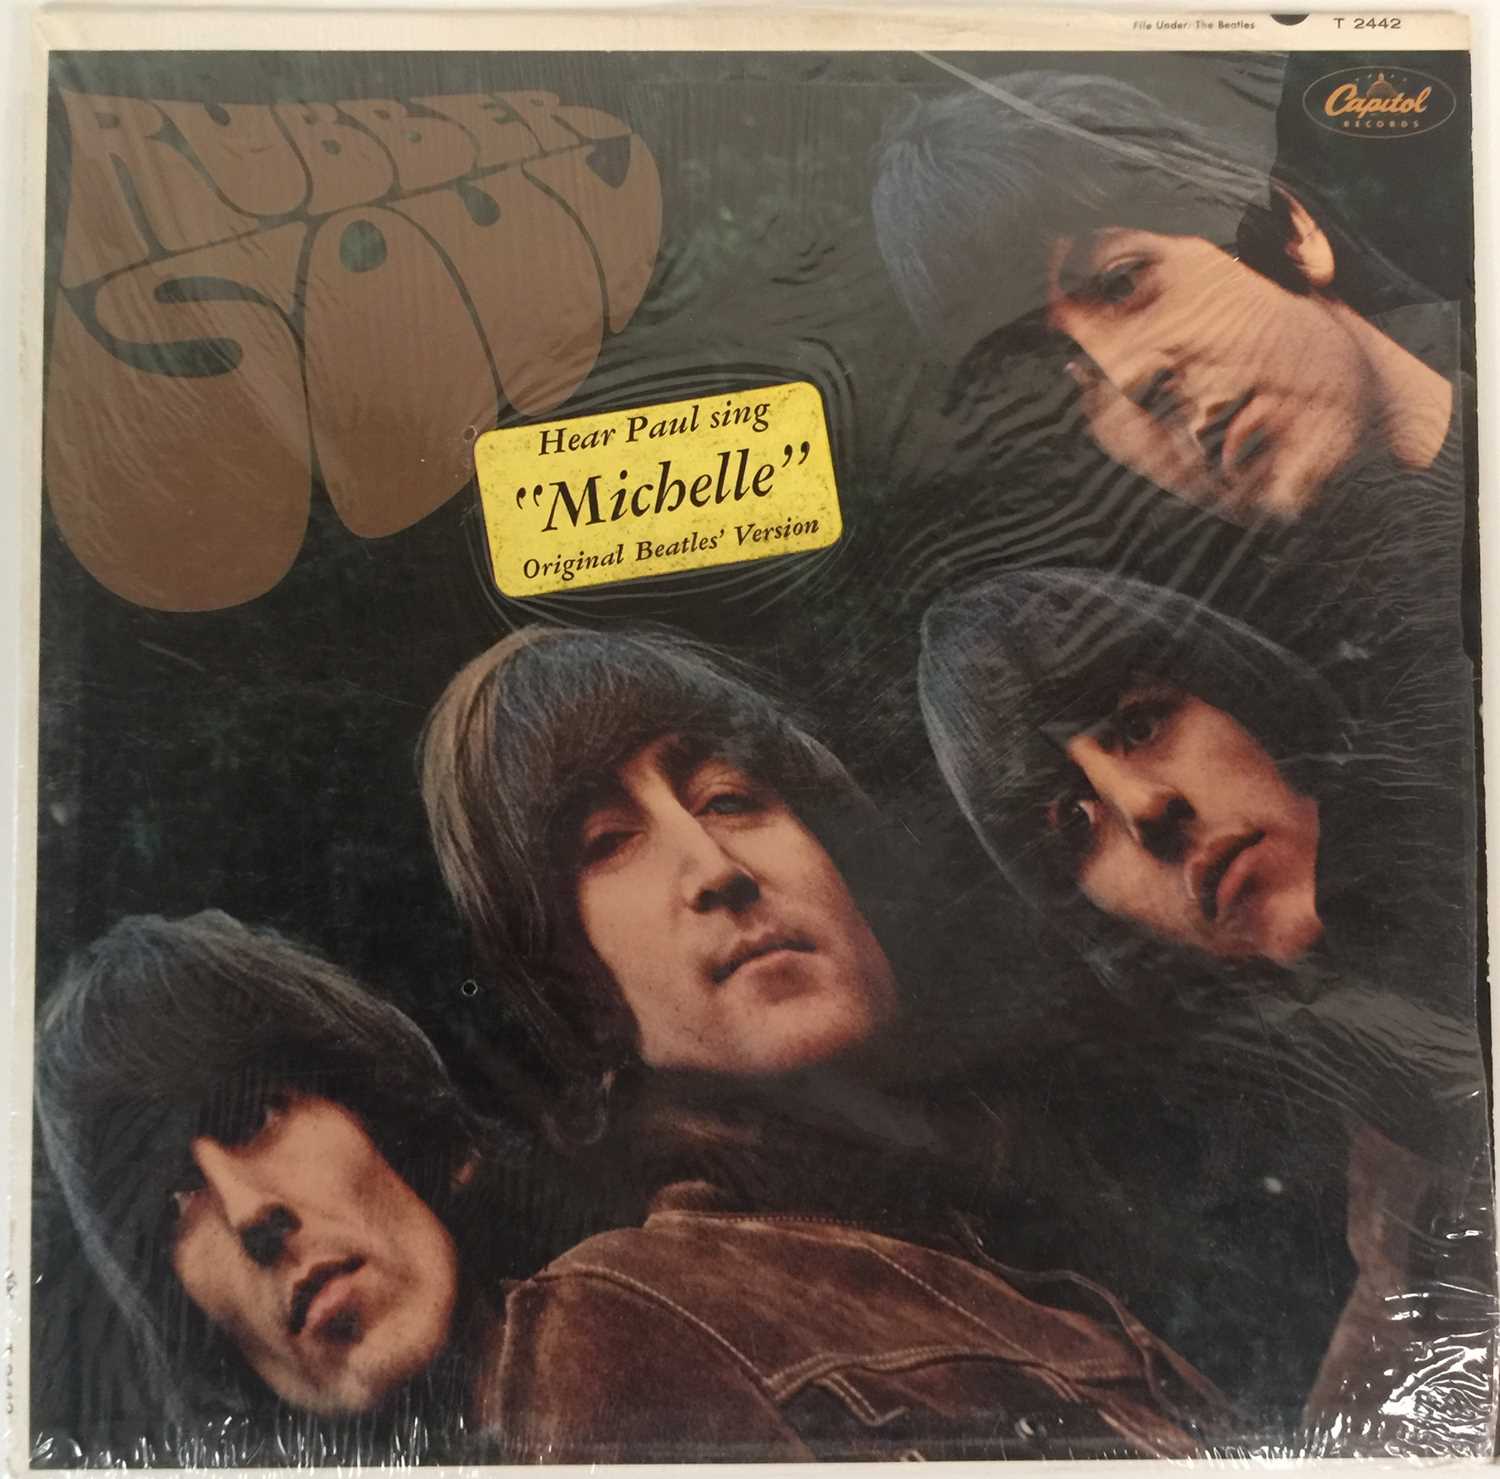 Lot 14 - THE BEATLES - RUBBER SOUL LP (US MONO 1966 PRESSING WITH HYPE STICKER - CAPITOL T-2442)